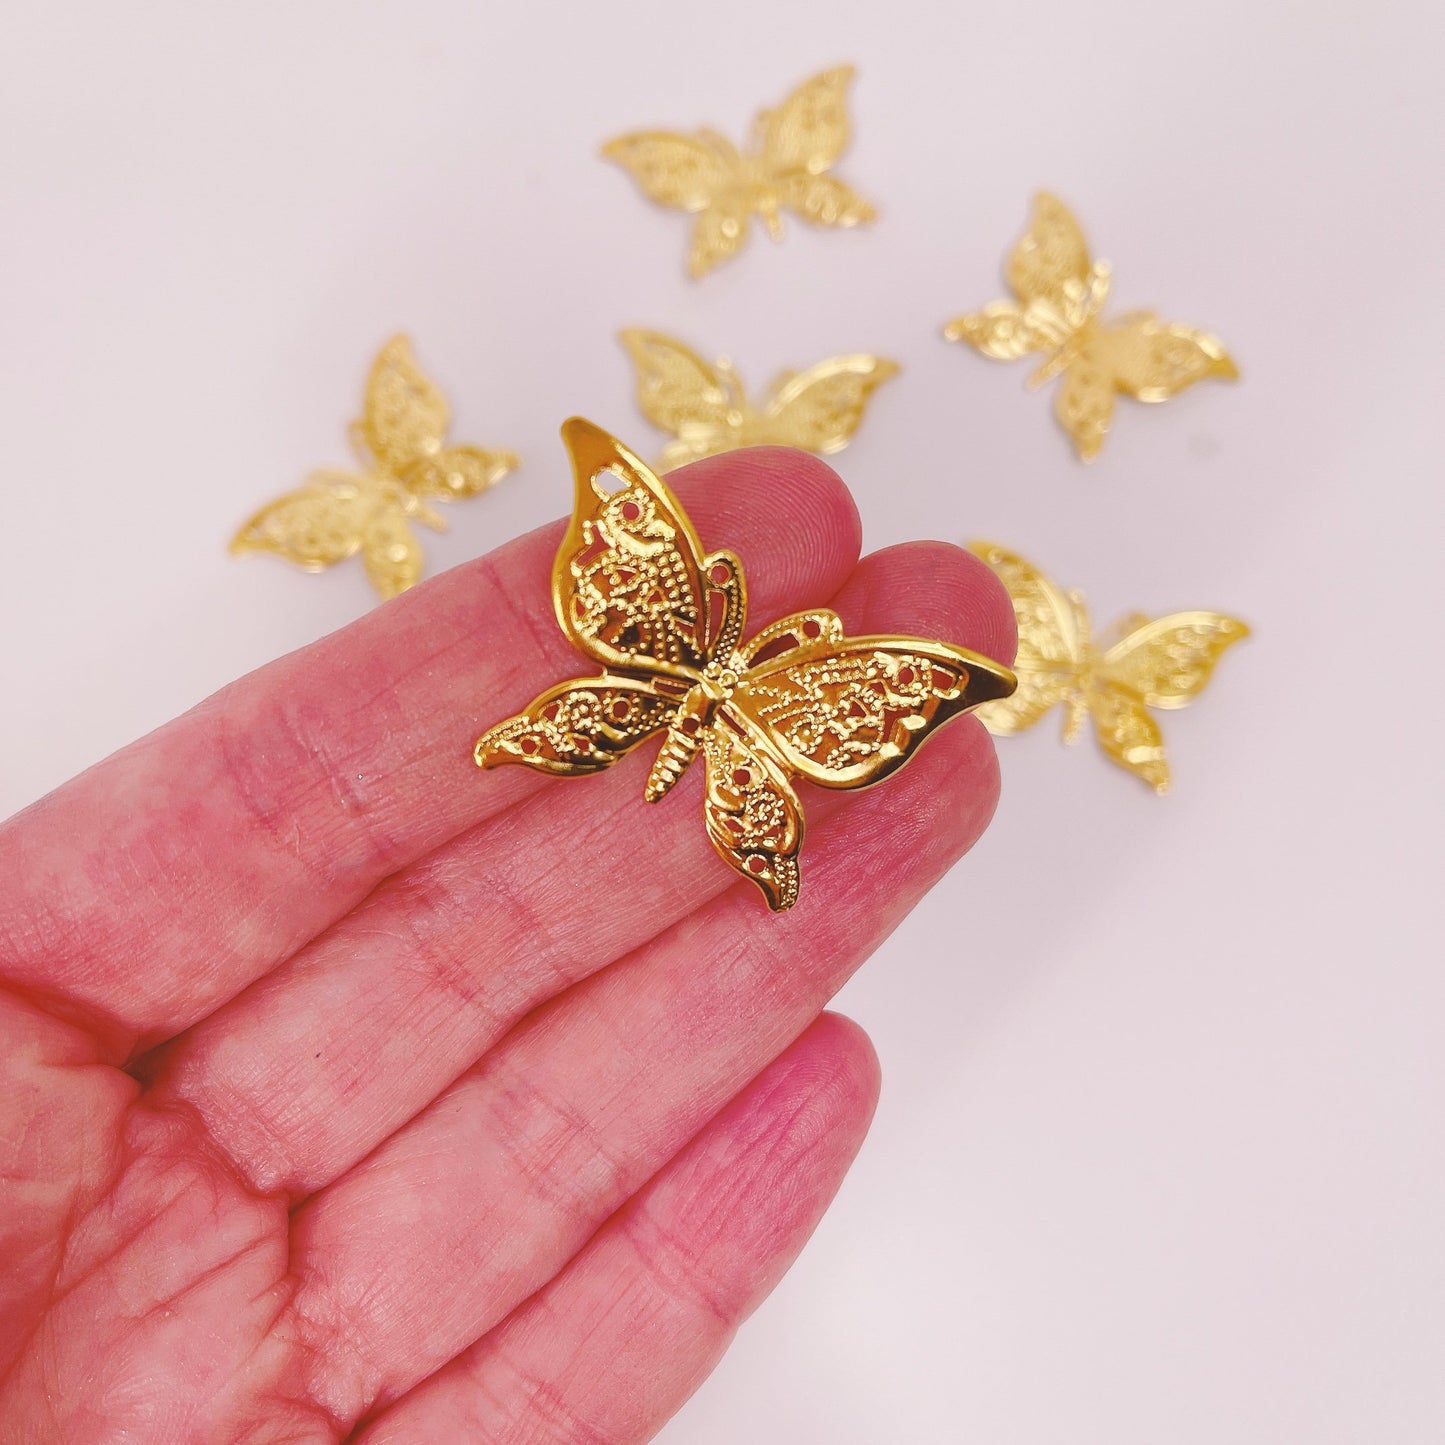 More Decos Filagree Gold, Antique Gold, Silver  or Mixed Arched Butterflies 2.6cm x 4cm Wing Span Pack of 10